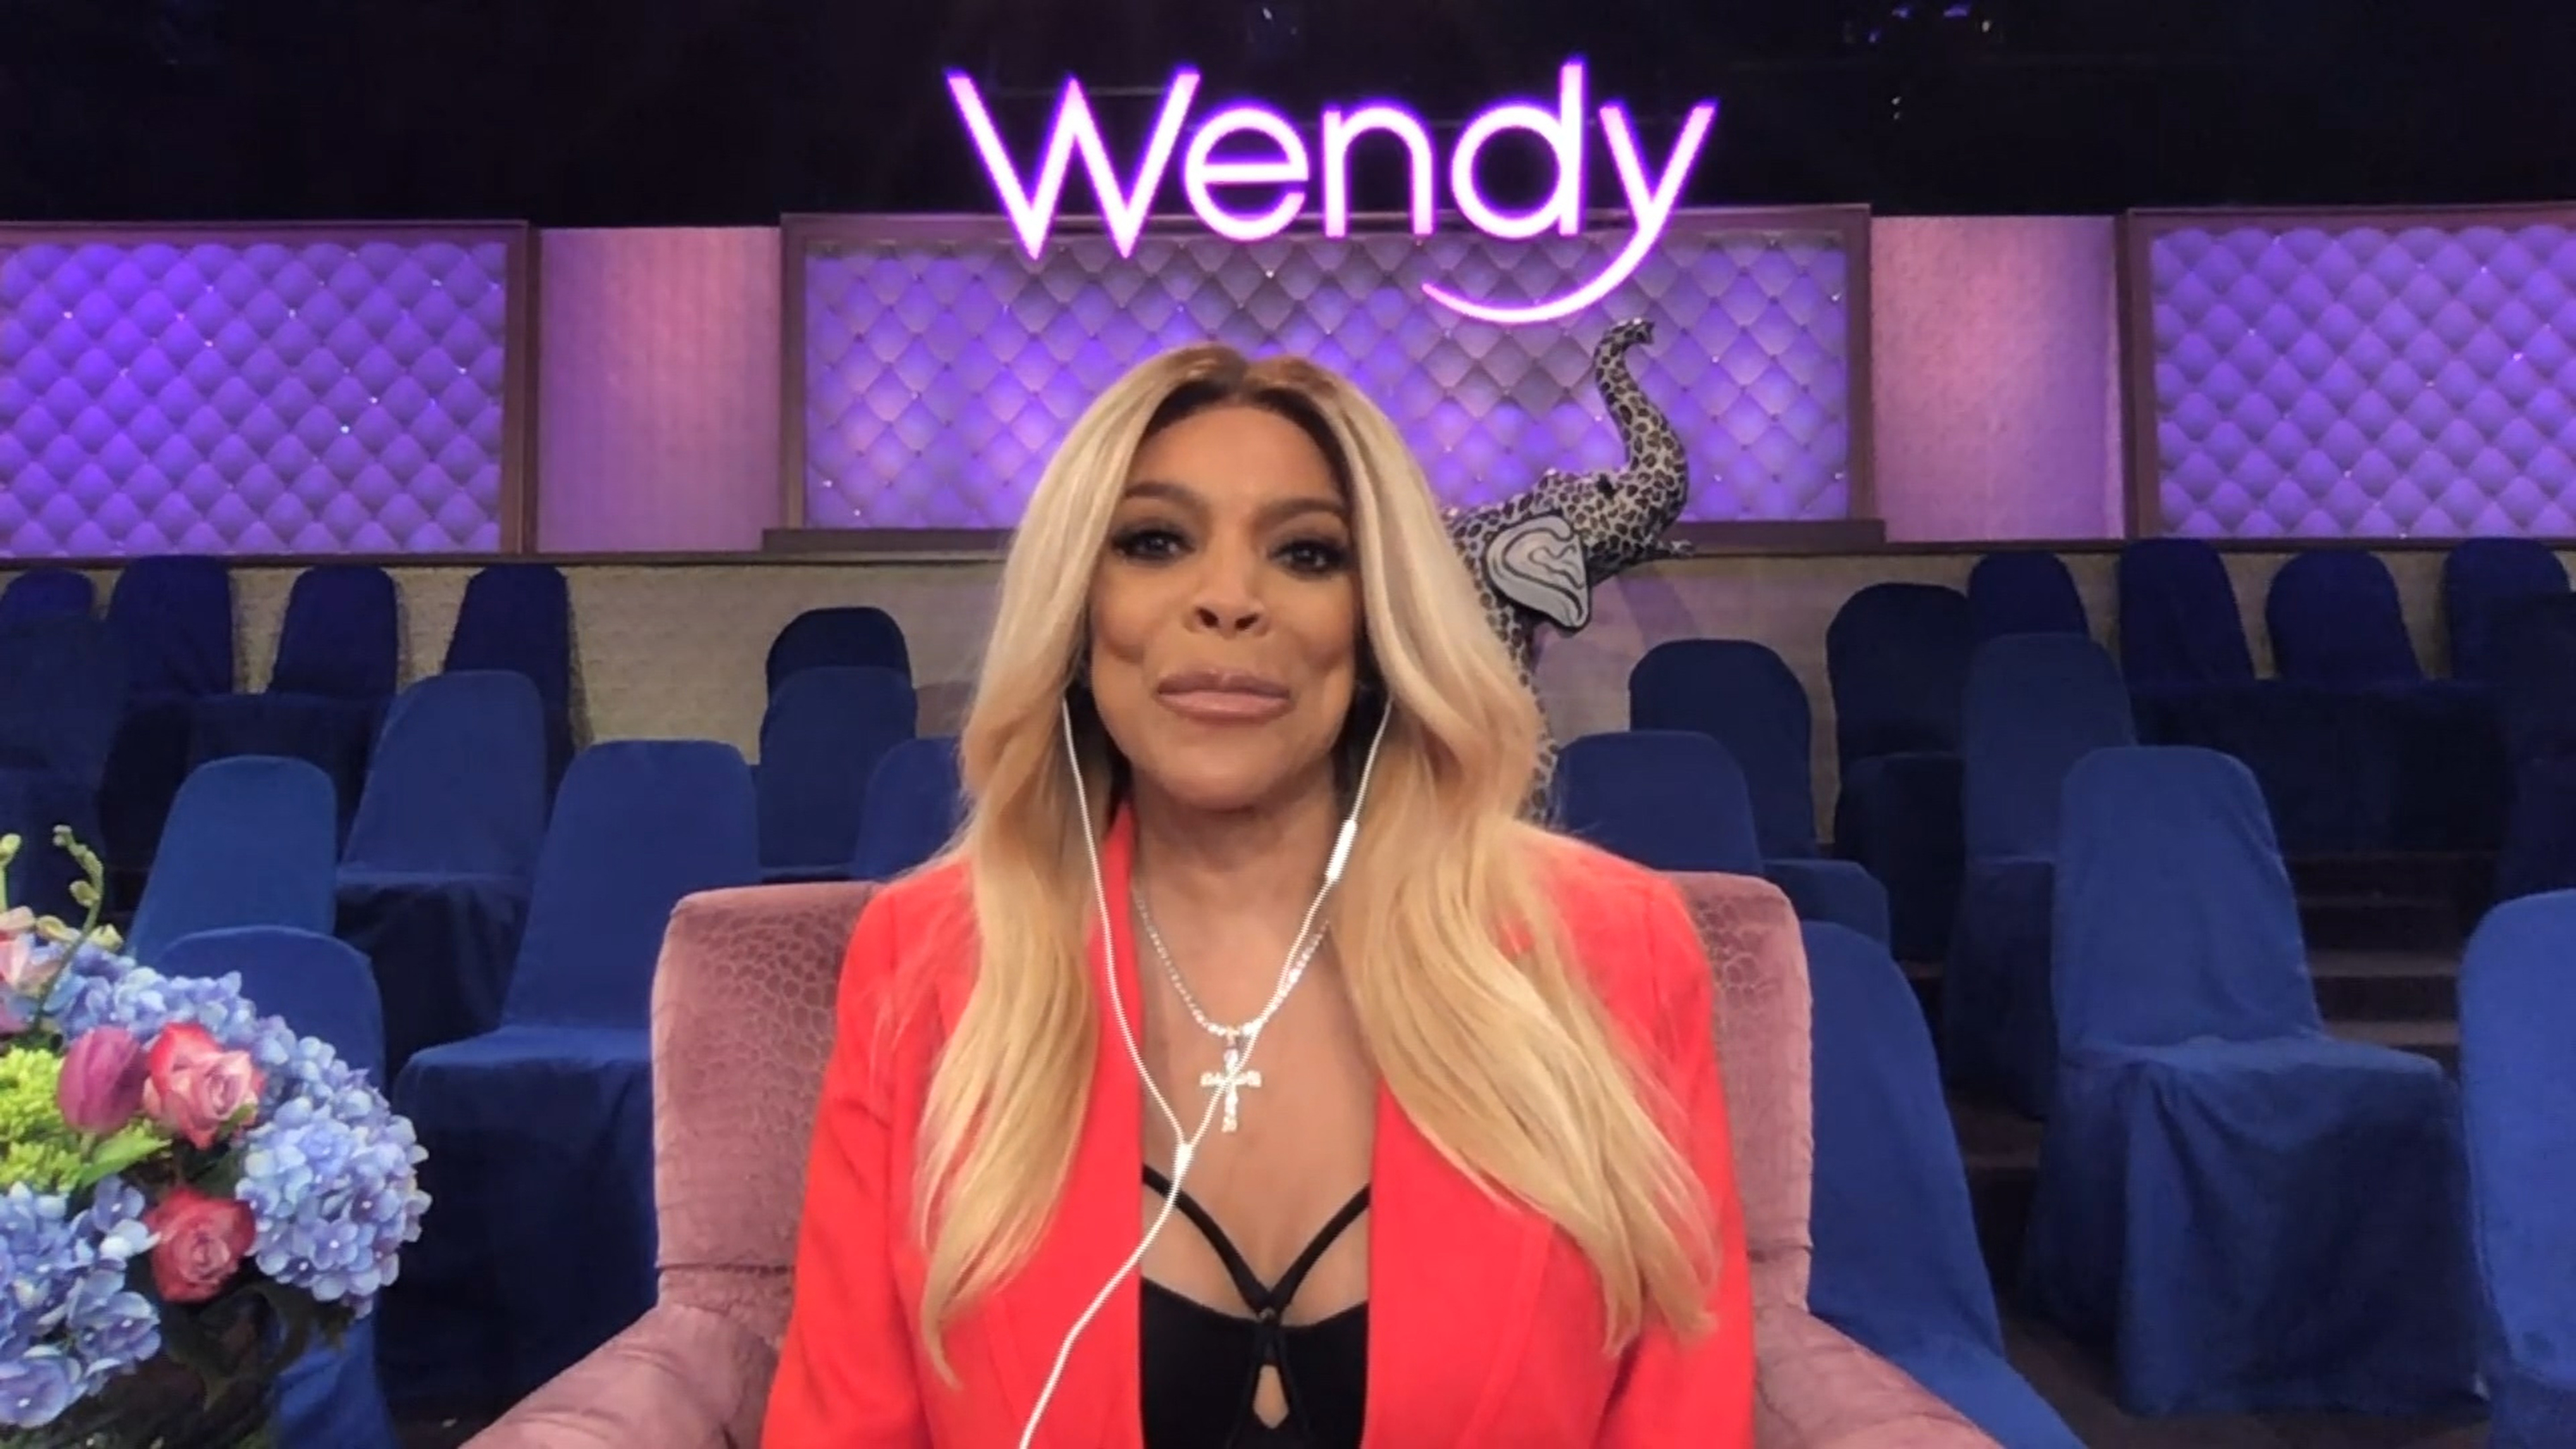 Wendy Williams during an appearance on "Watch What Happens Live with Andy Cohen" on September 27, 2020. | Source: Getty Images